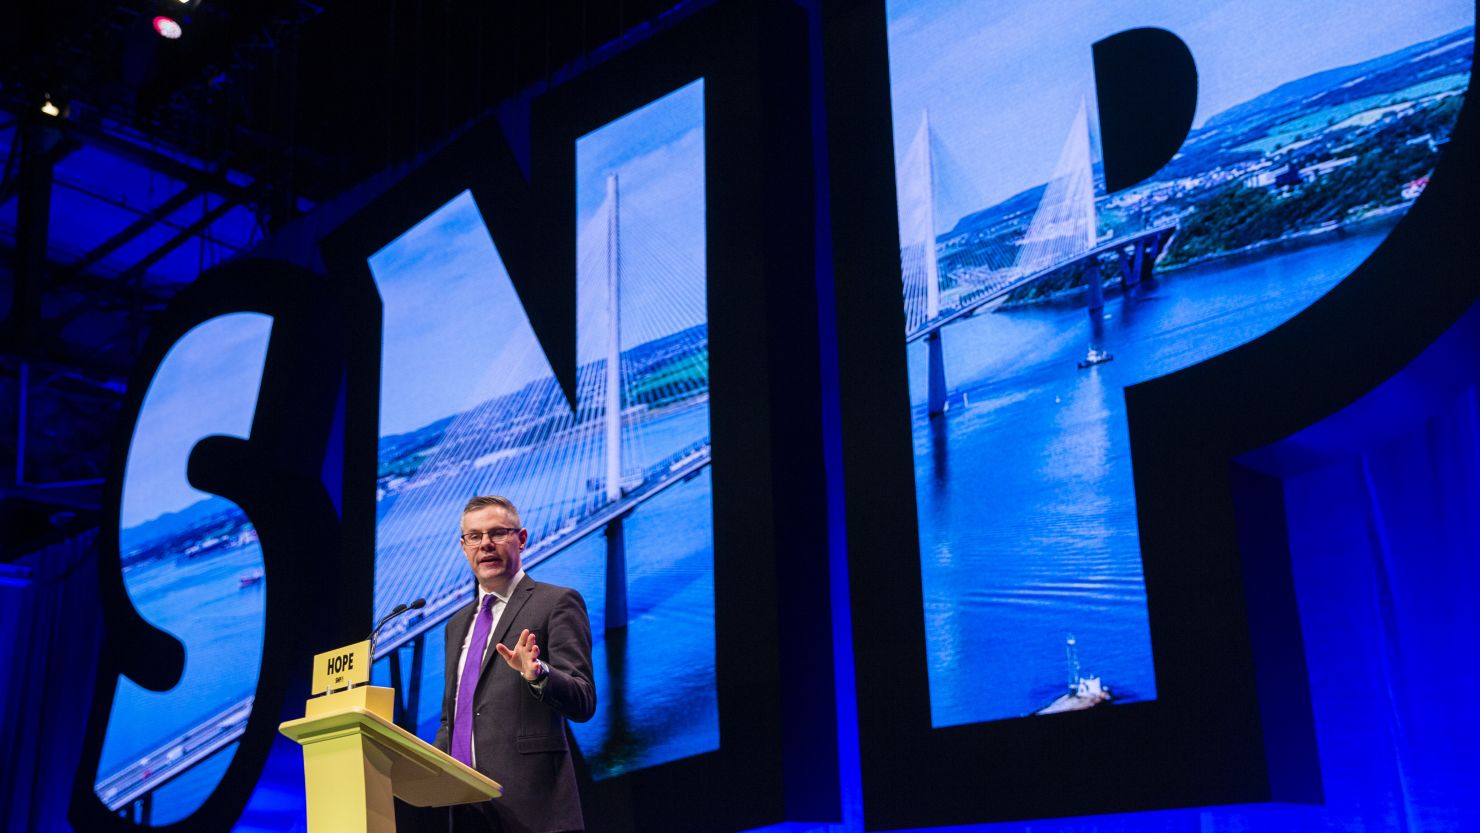 Derek Mackay resigned as Scotland's finance secretary and was suspended from the Scottish National Party (SNP).